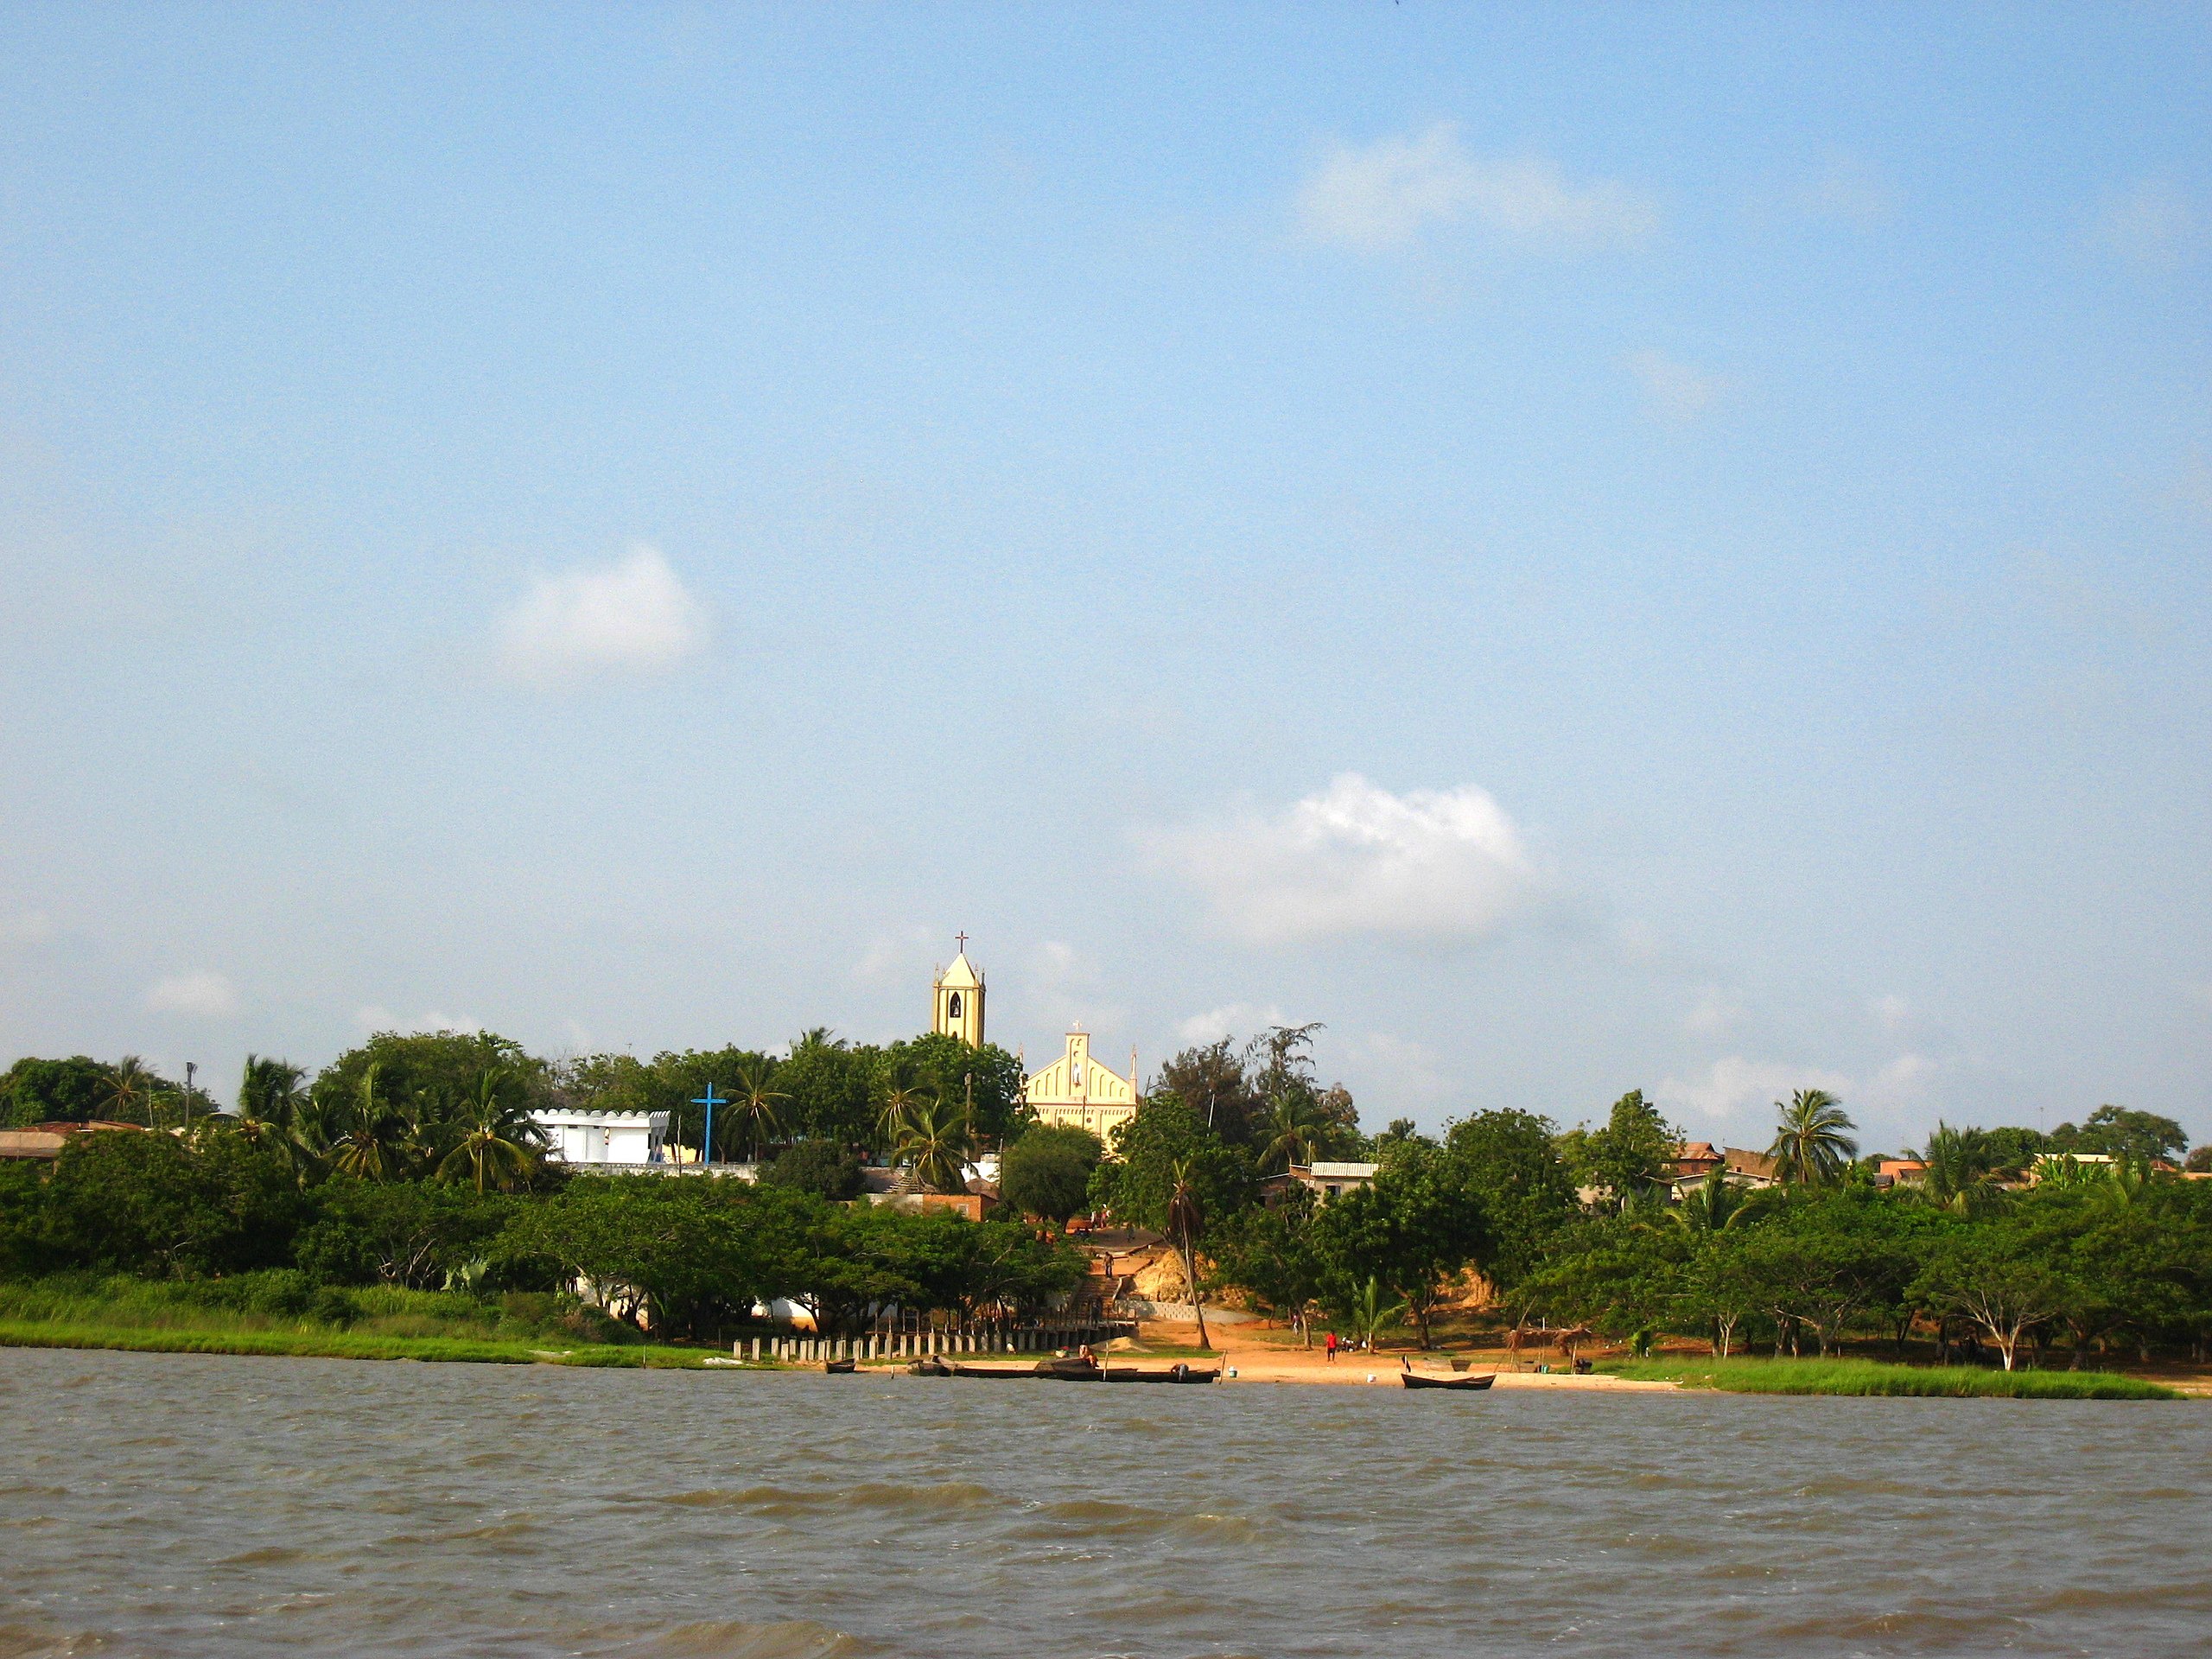 Togoville, with the cathedral of the Marian sanctuary Notre-Dame du Lac Togo which stands out in the distance.